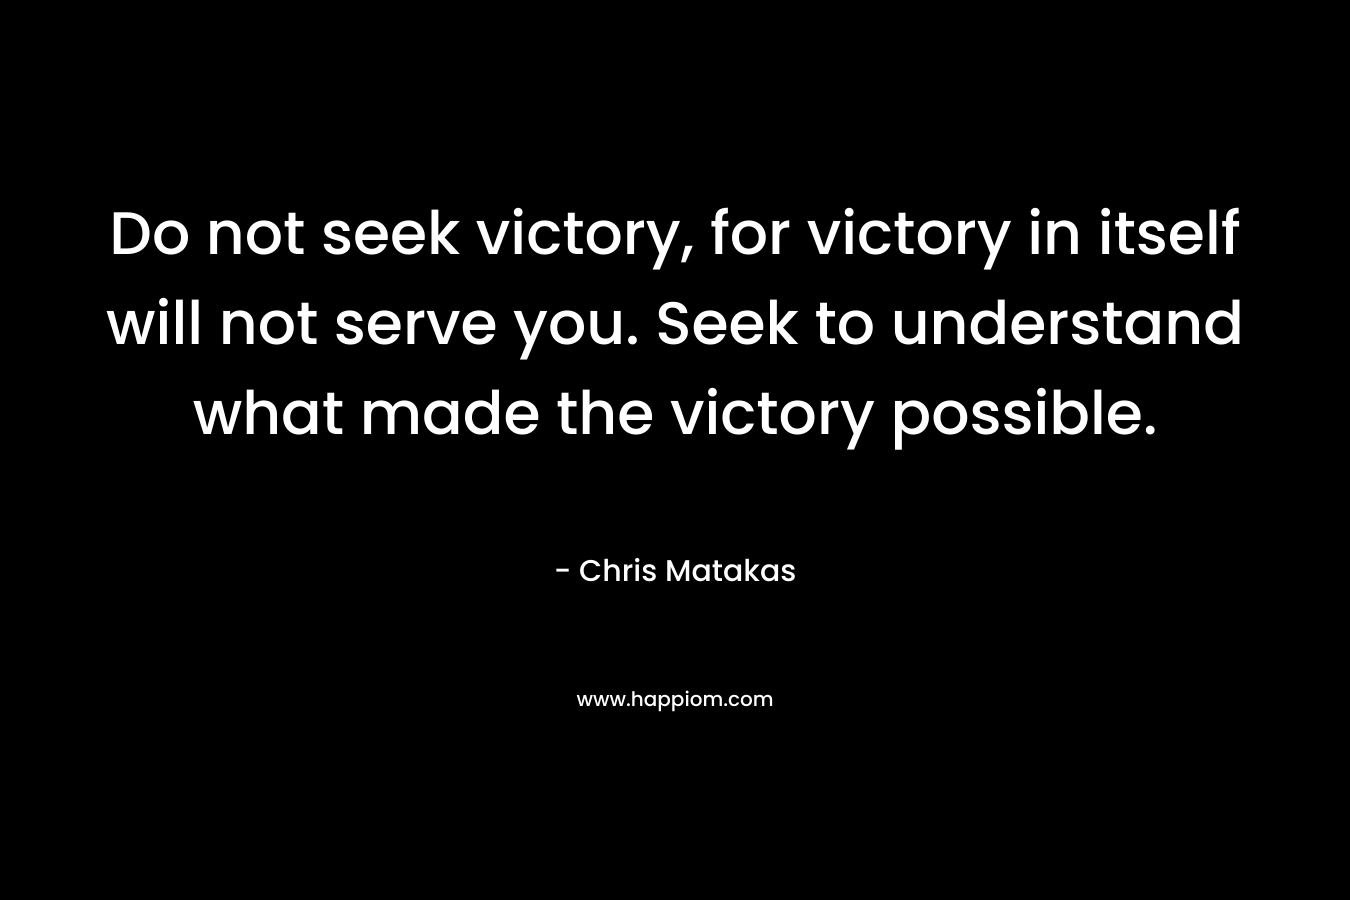 Do not seek victory, for victory in itself will not serve you. Seek to understand what made the victory possible.